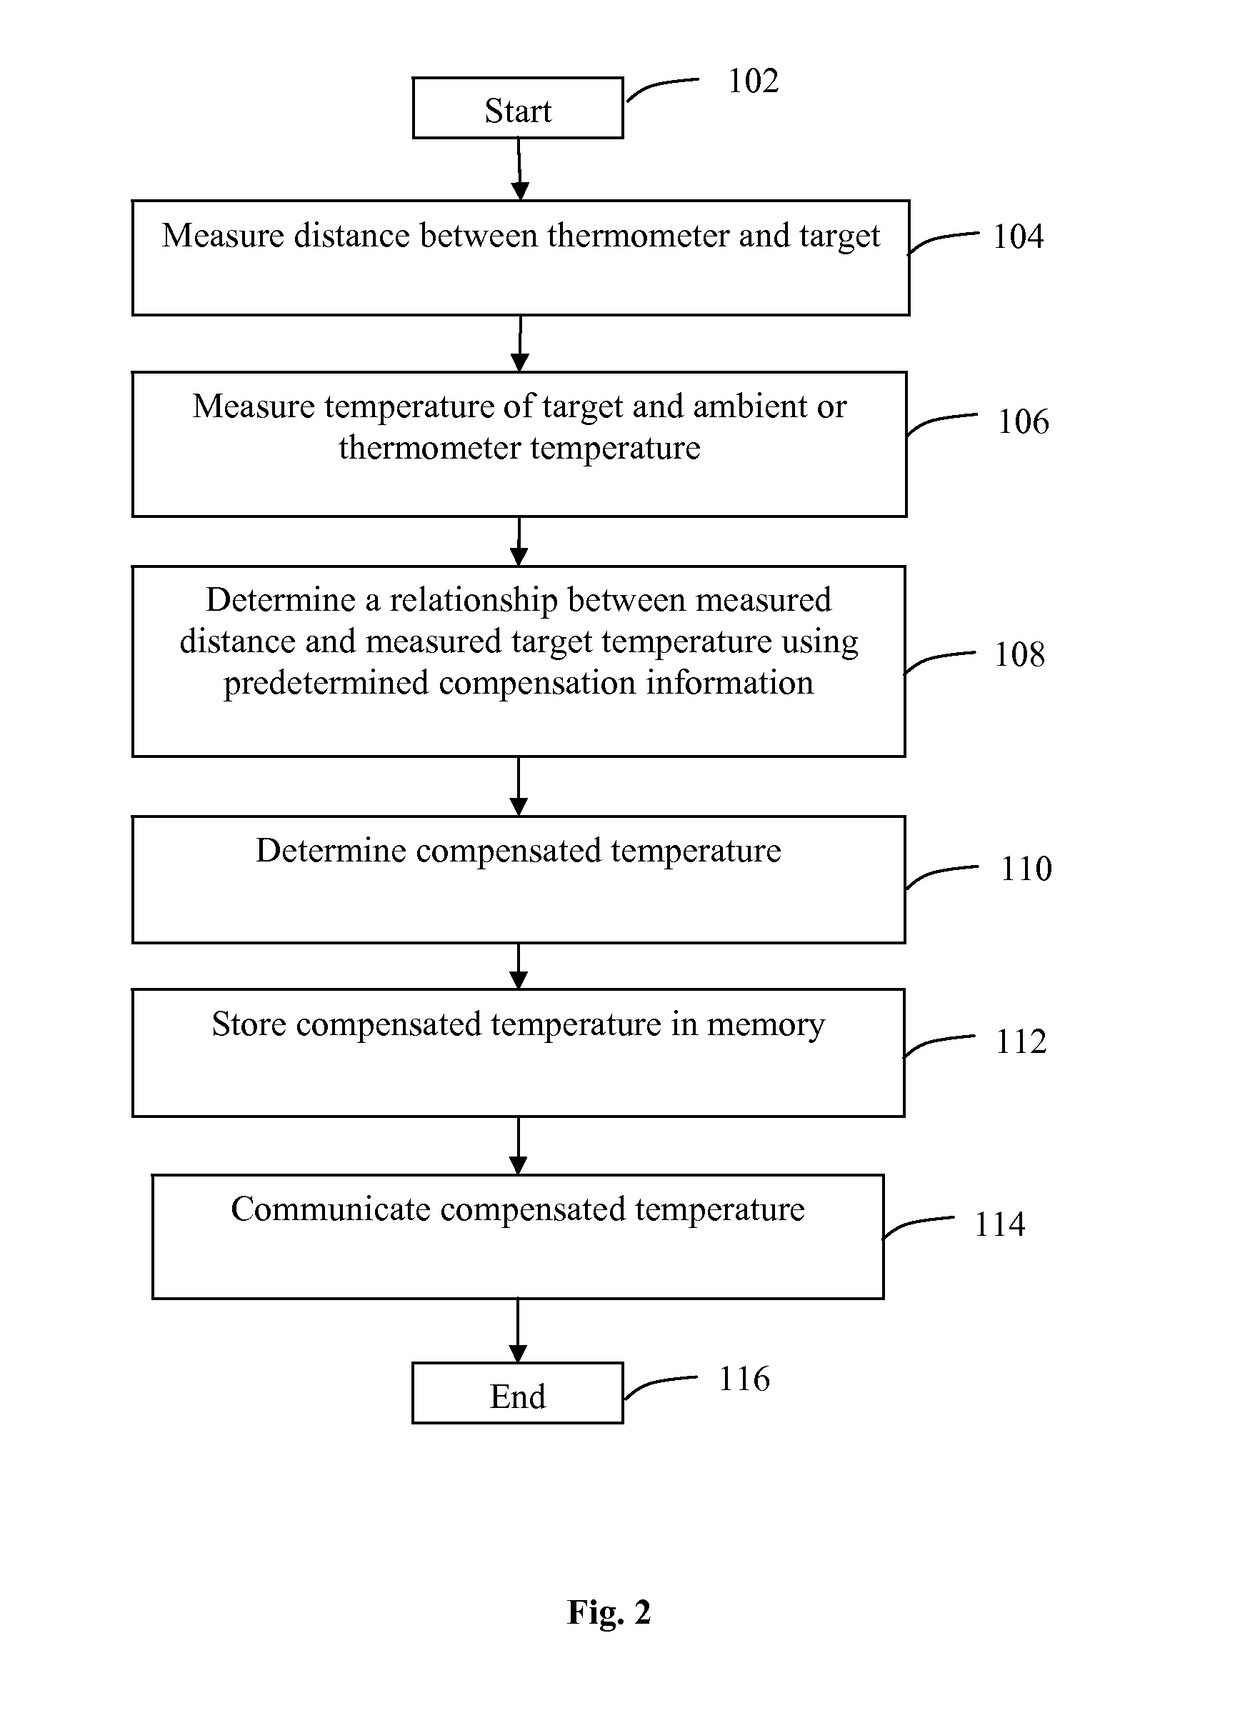 Non-contact medical thermometer with distance sensing and compensation